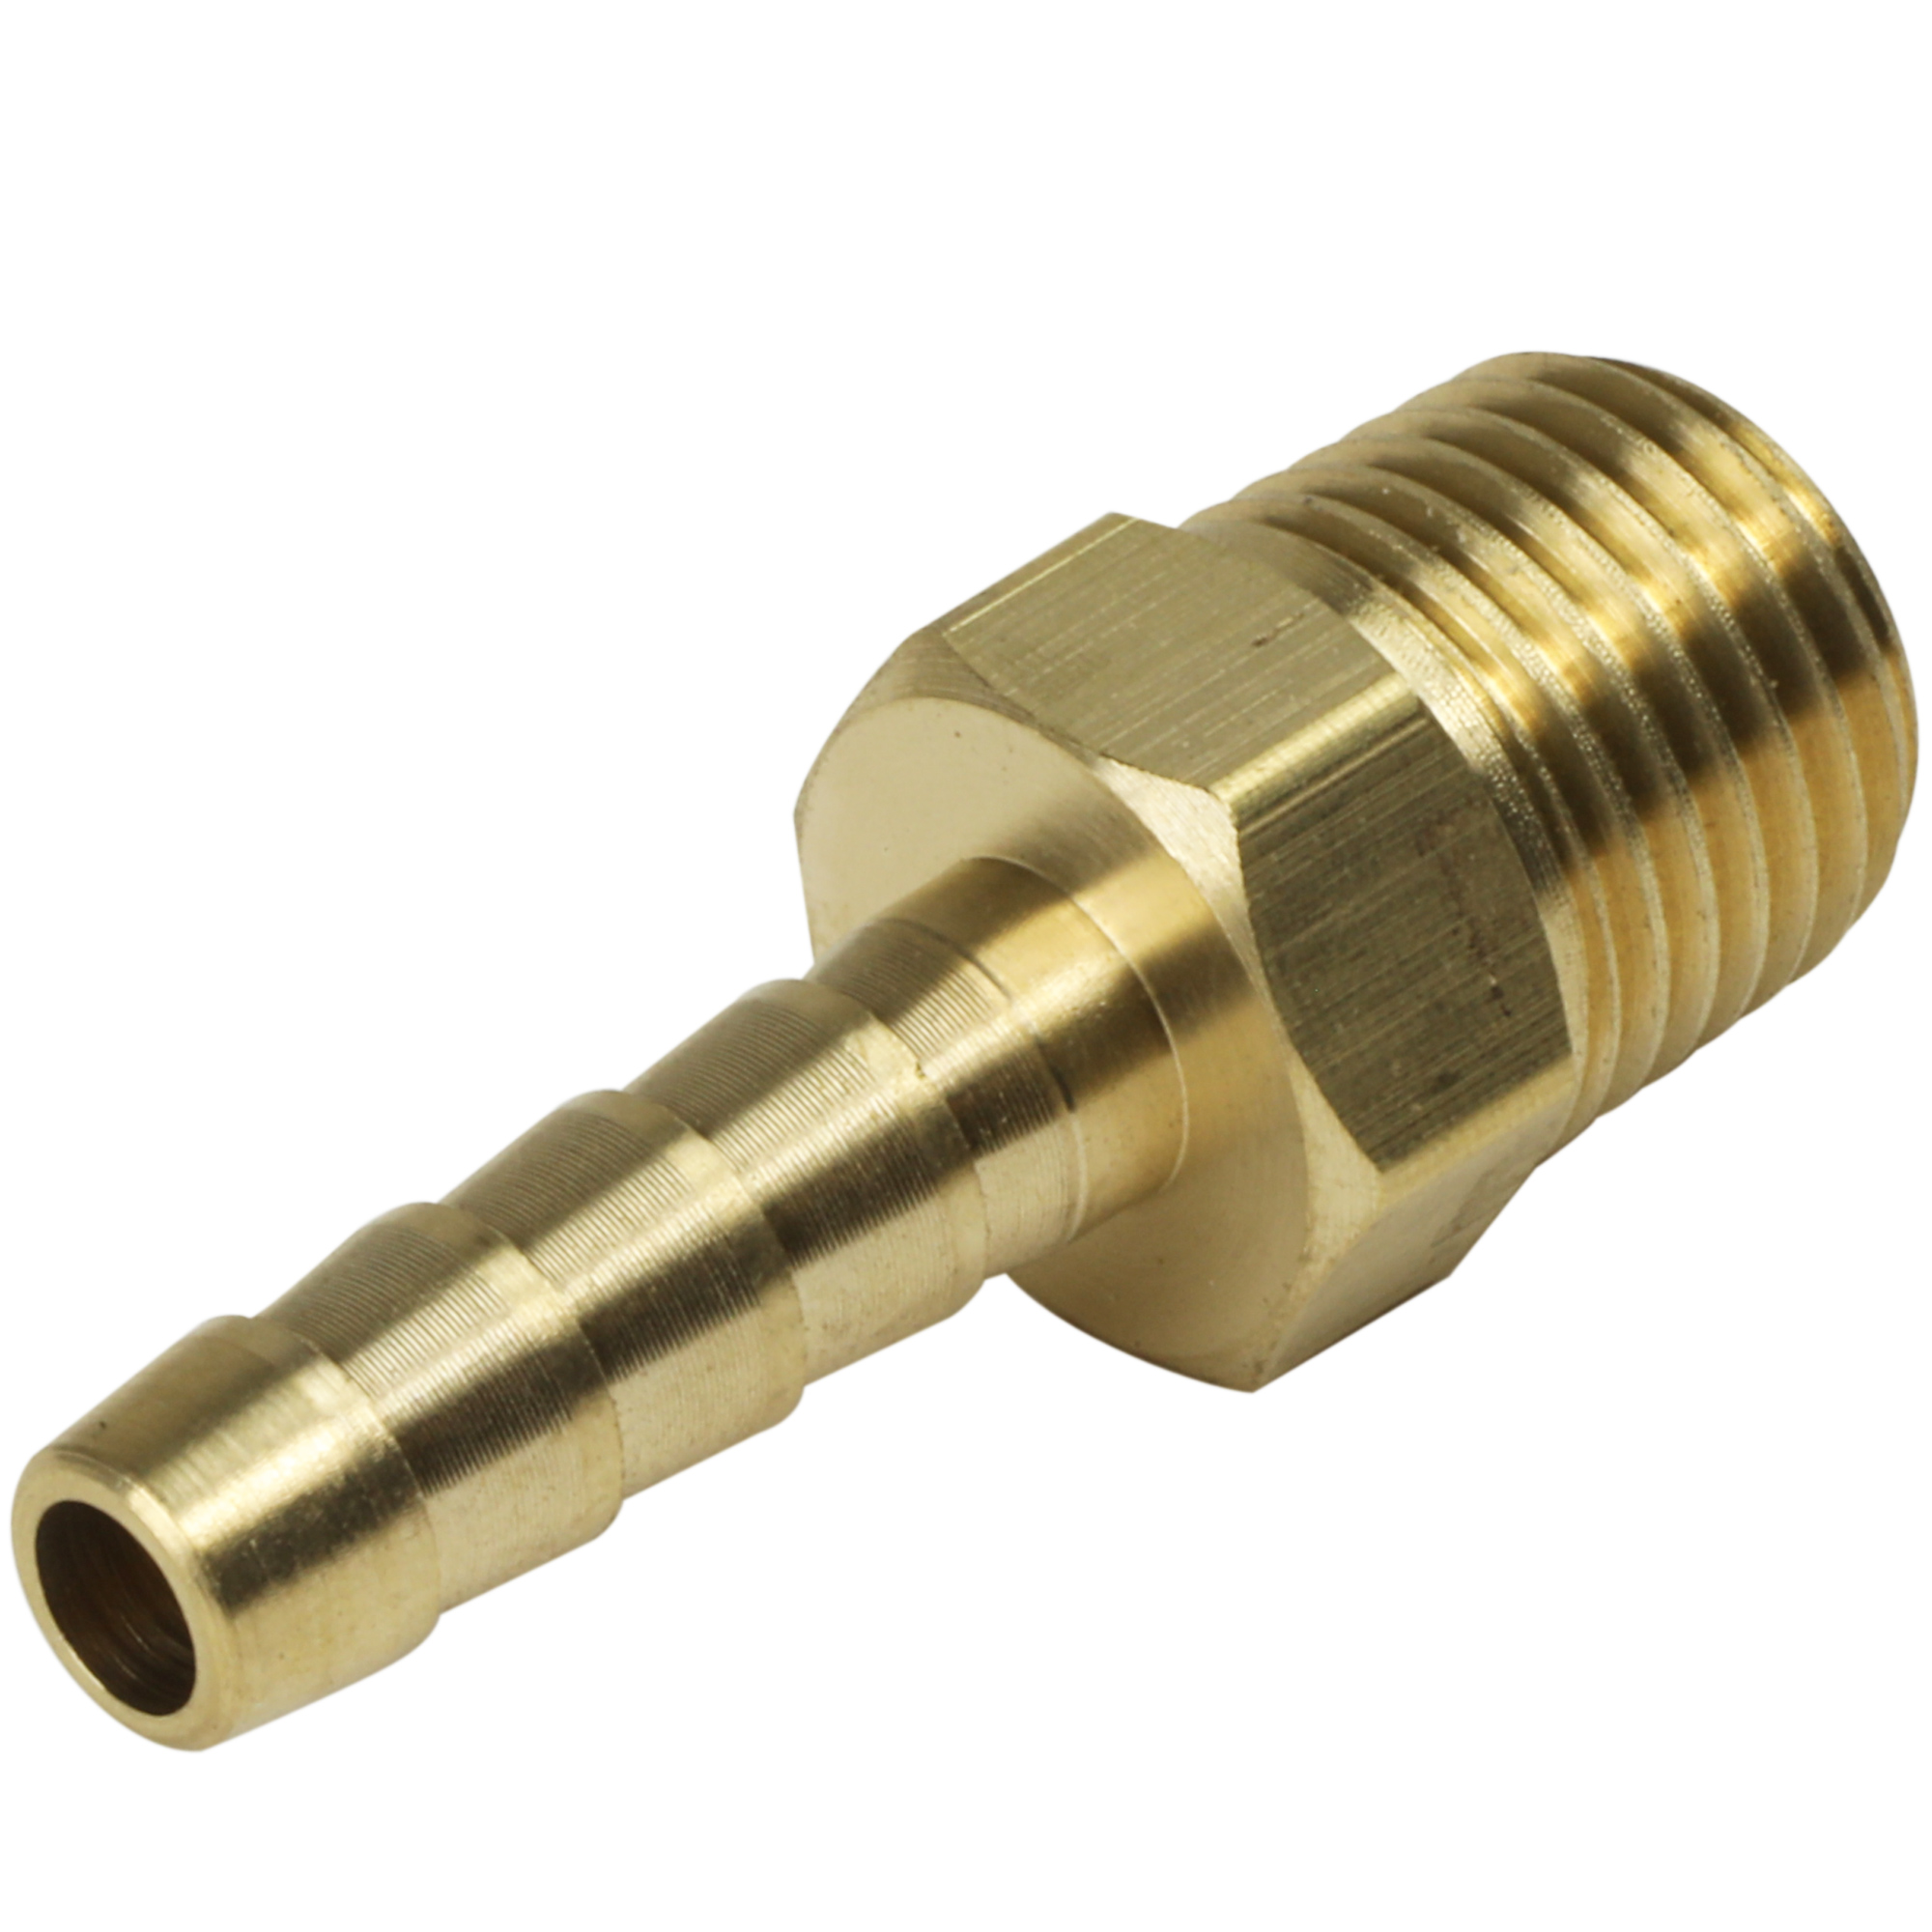 Hose Tail Fittings & Blanks - 1/8 NPT to 6mm